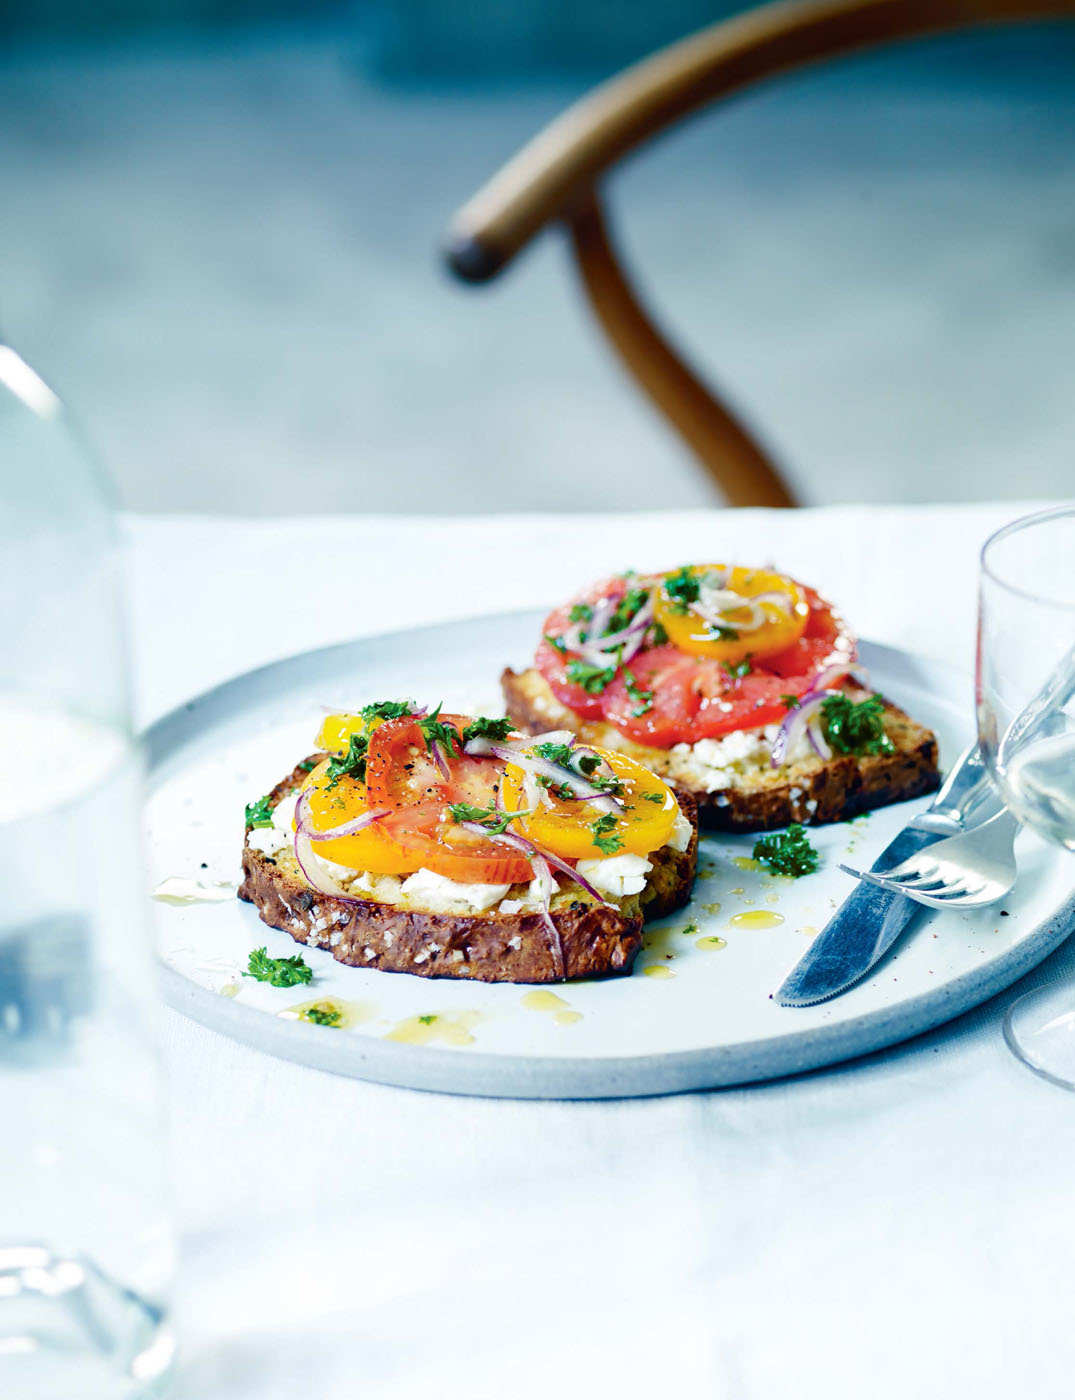 Heritage tomatoes and Yorkshire Fettle on toast